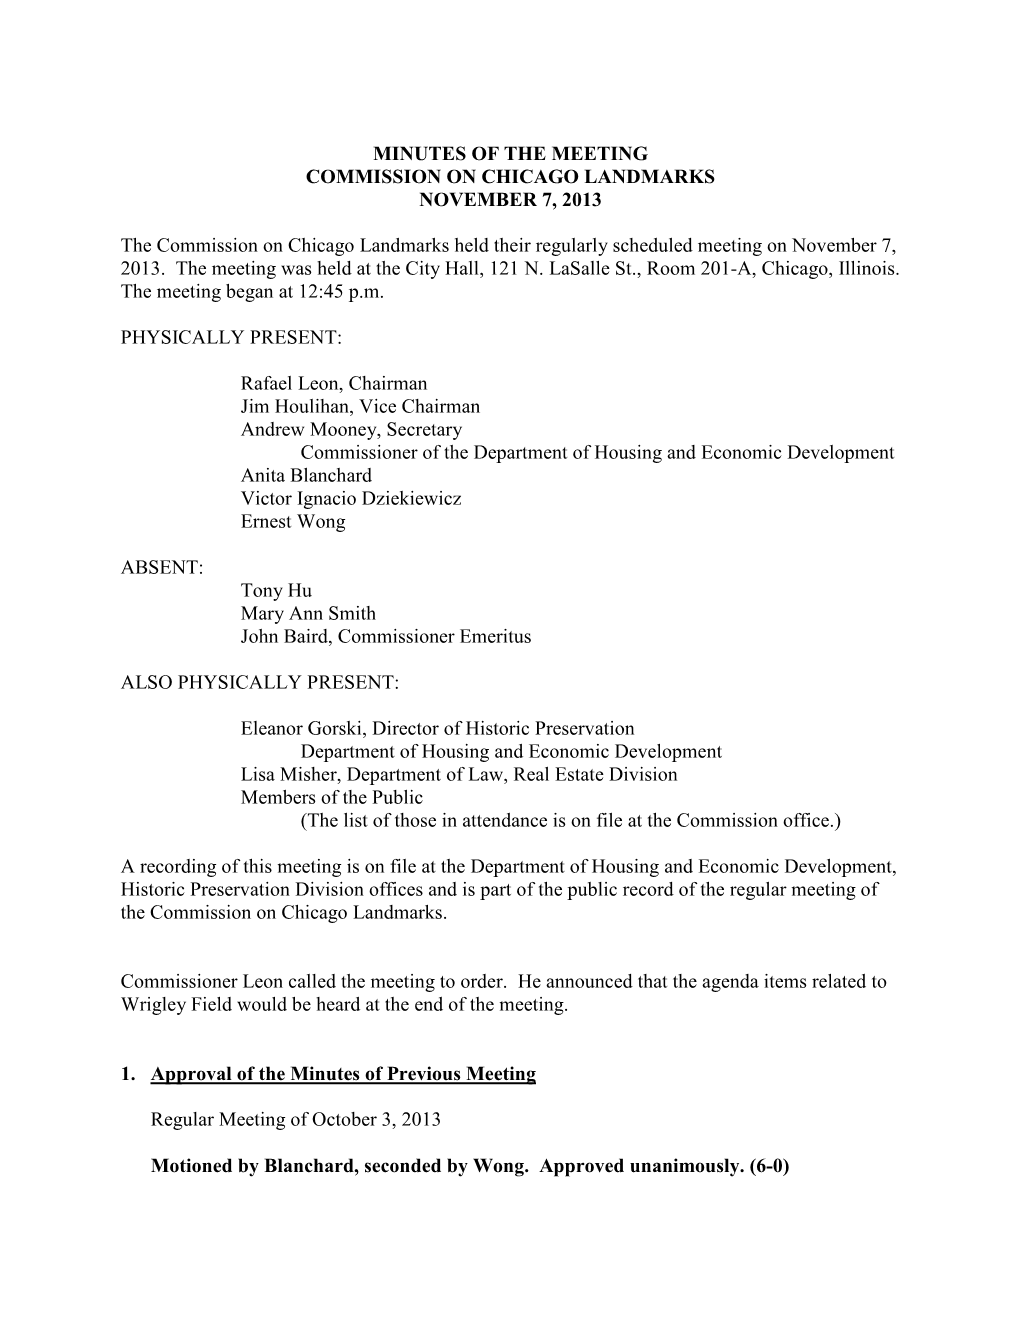 Minutes of the Meeting Commission on Chicago Landmarks November 7, 2013